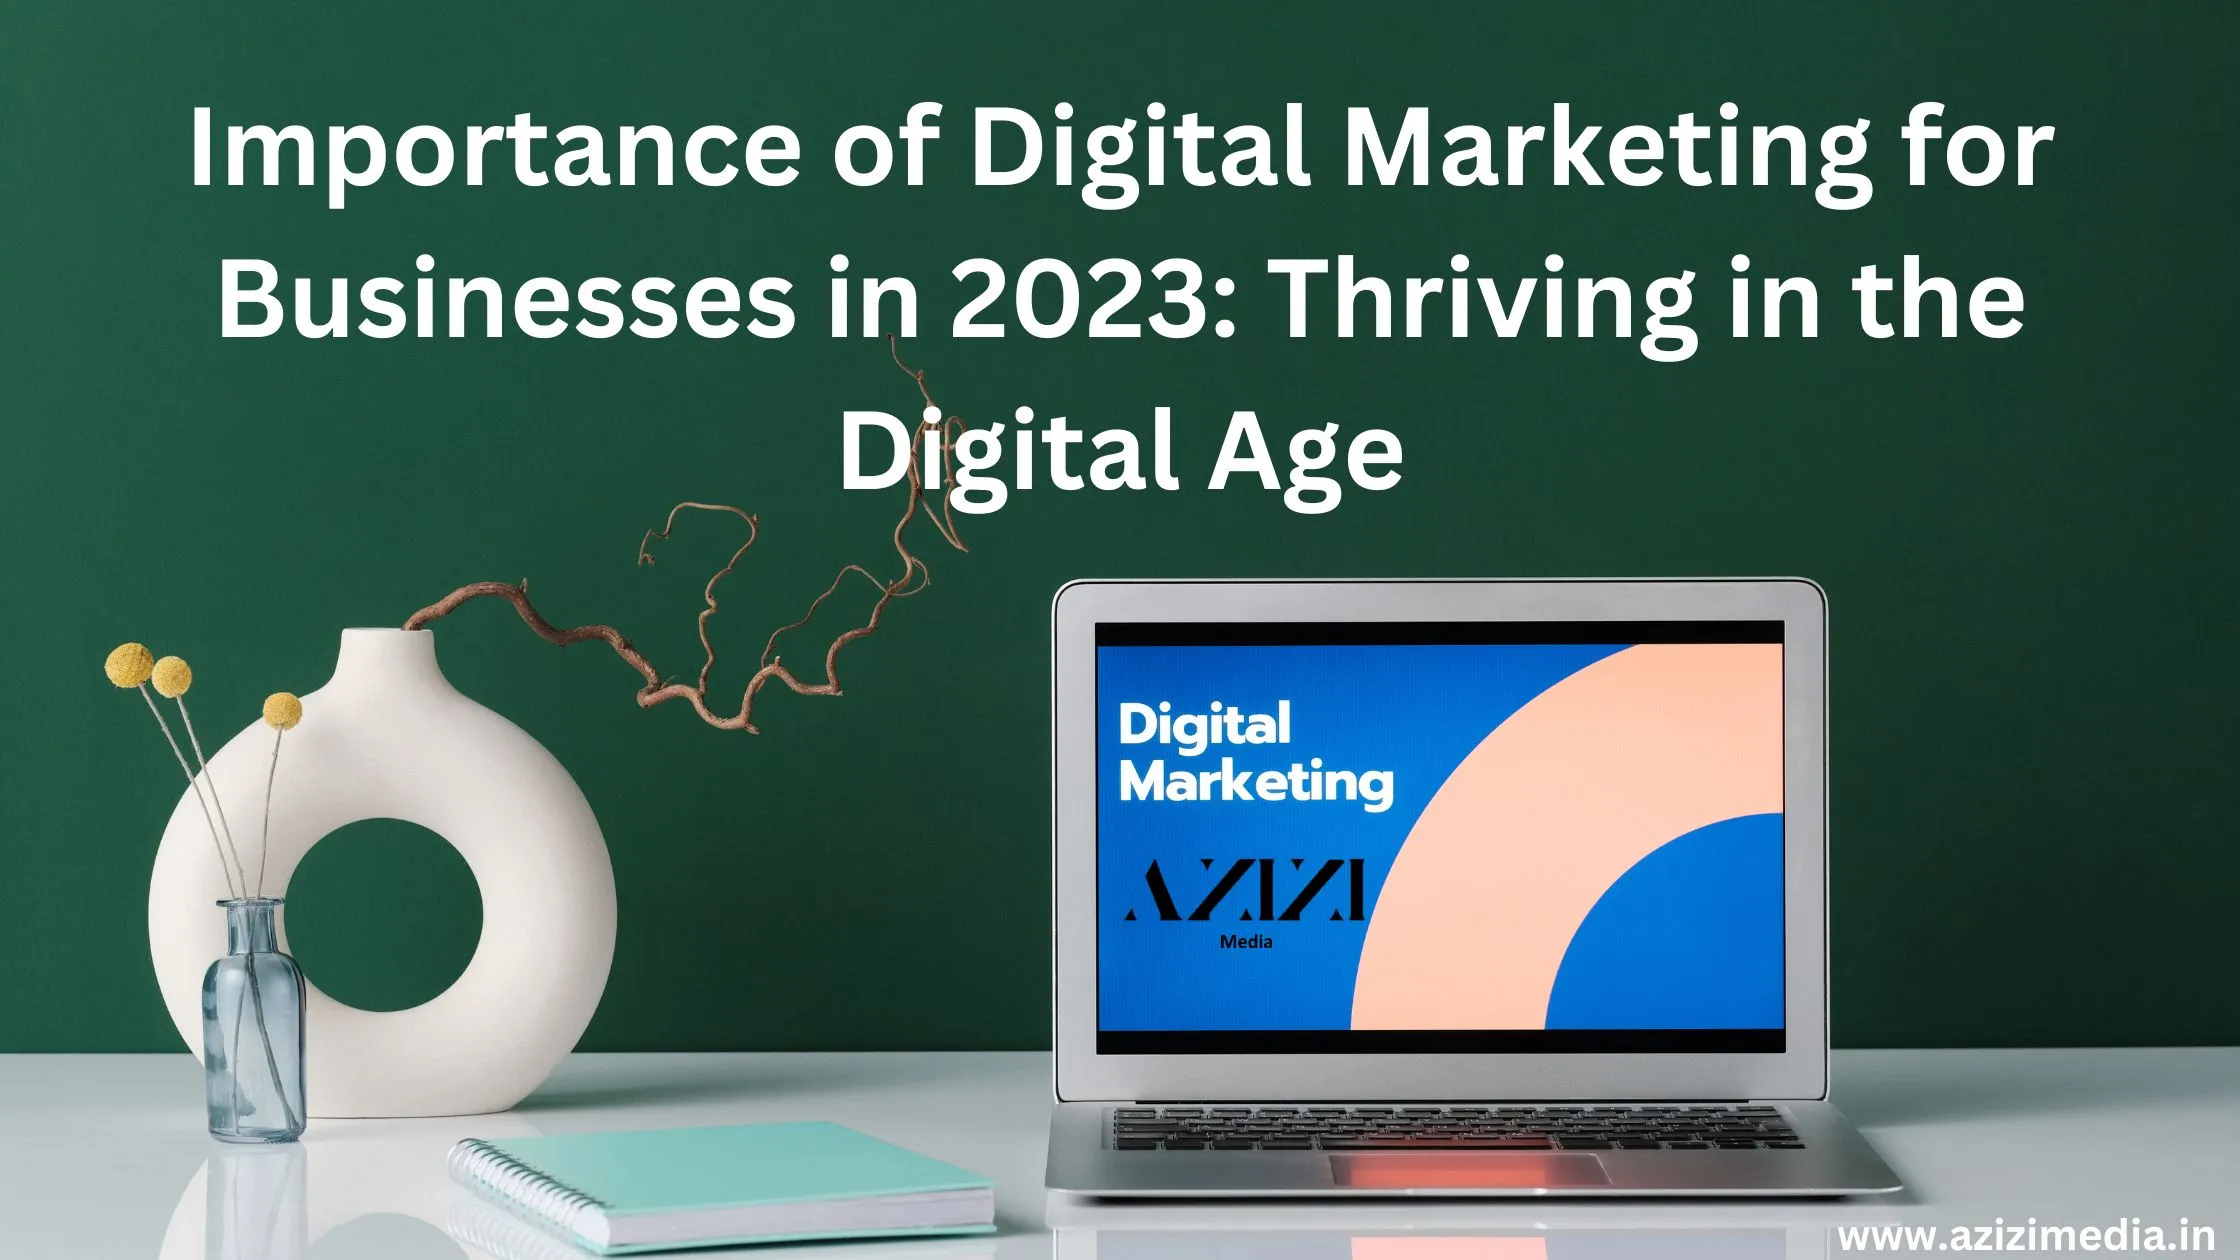 Importance of Digital Marketing for Businesses in 2023: Thriving in the Digital Age